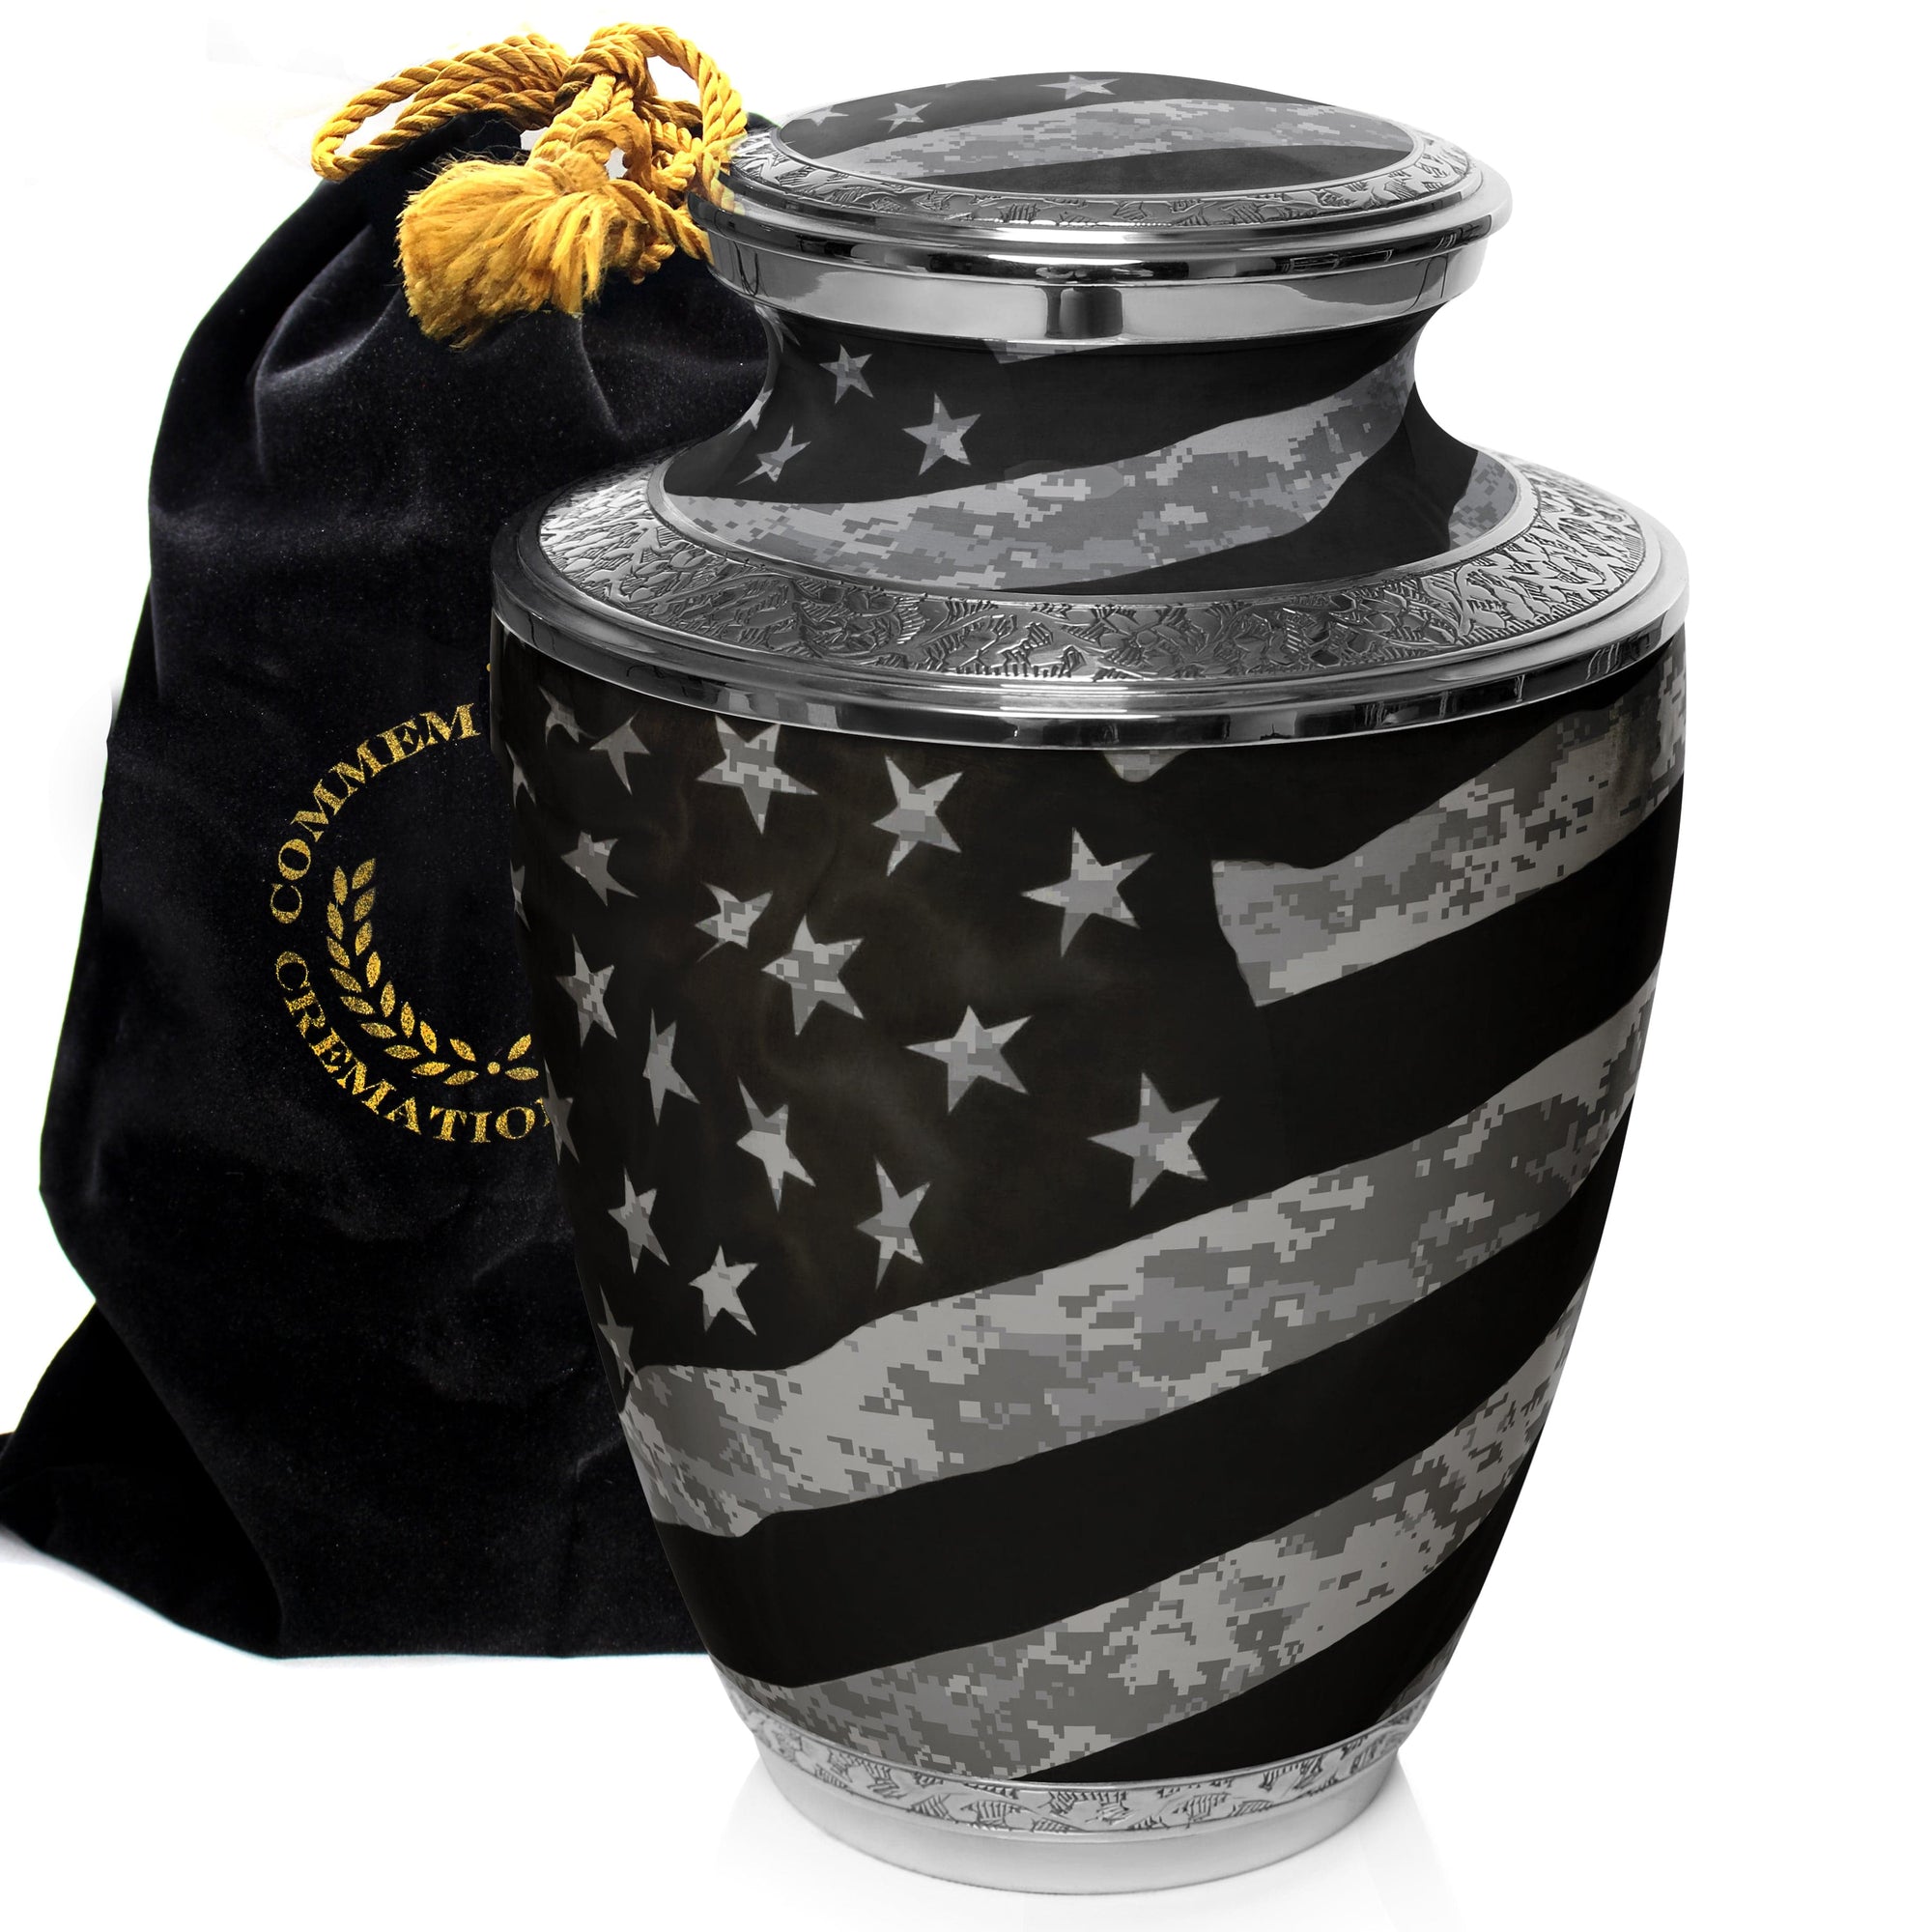 Commemorative Cremation Urns Home & Garden Army UCP Flag Military Cremation Urn